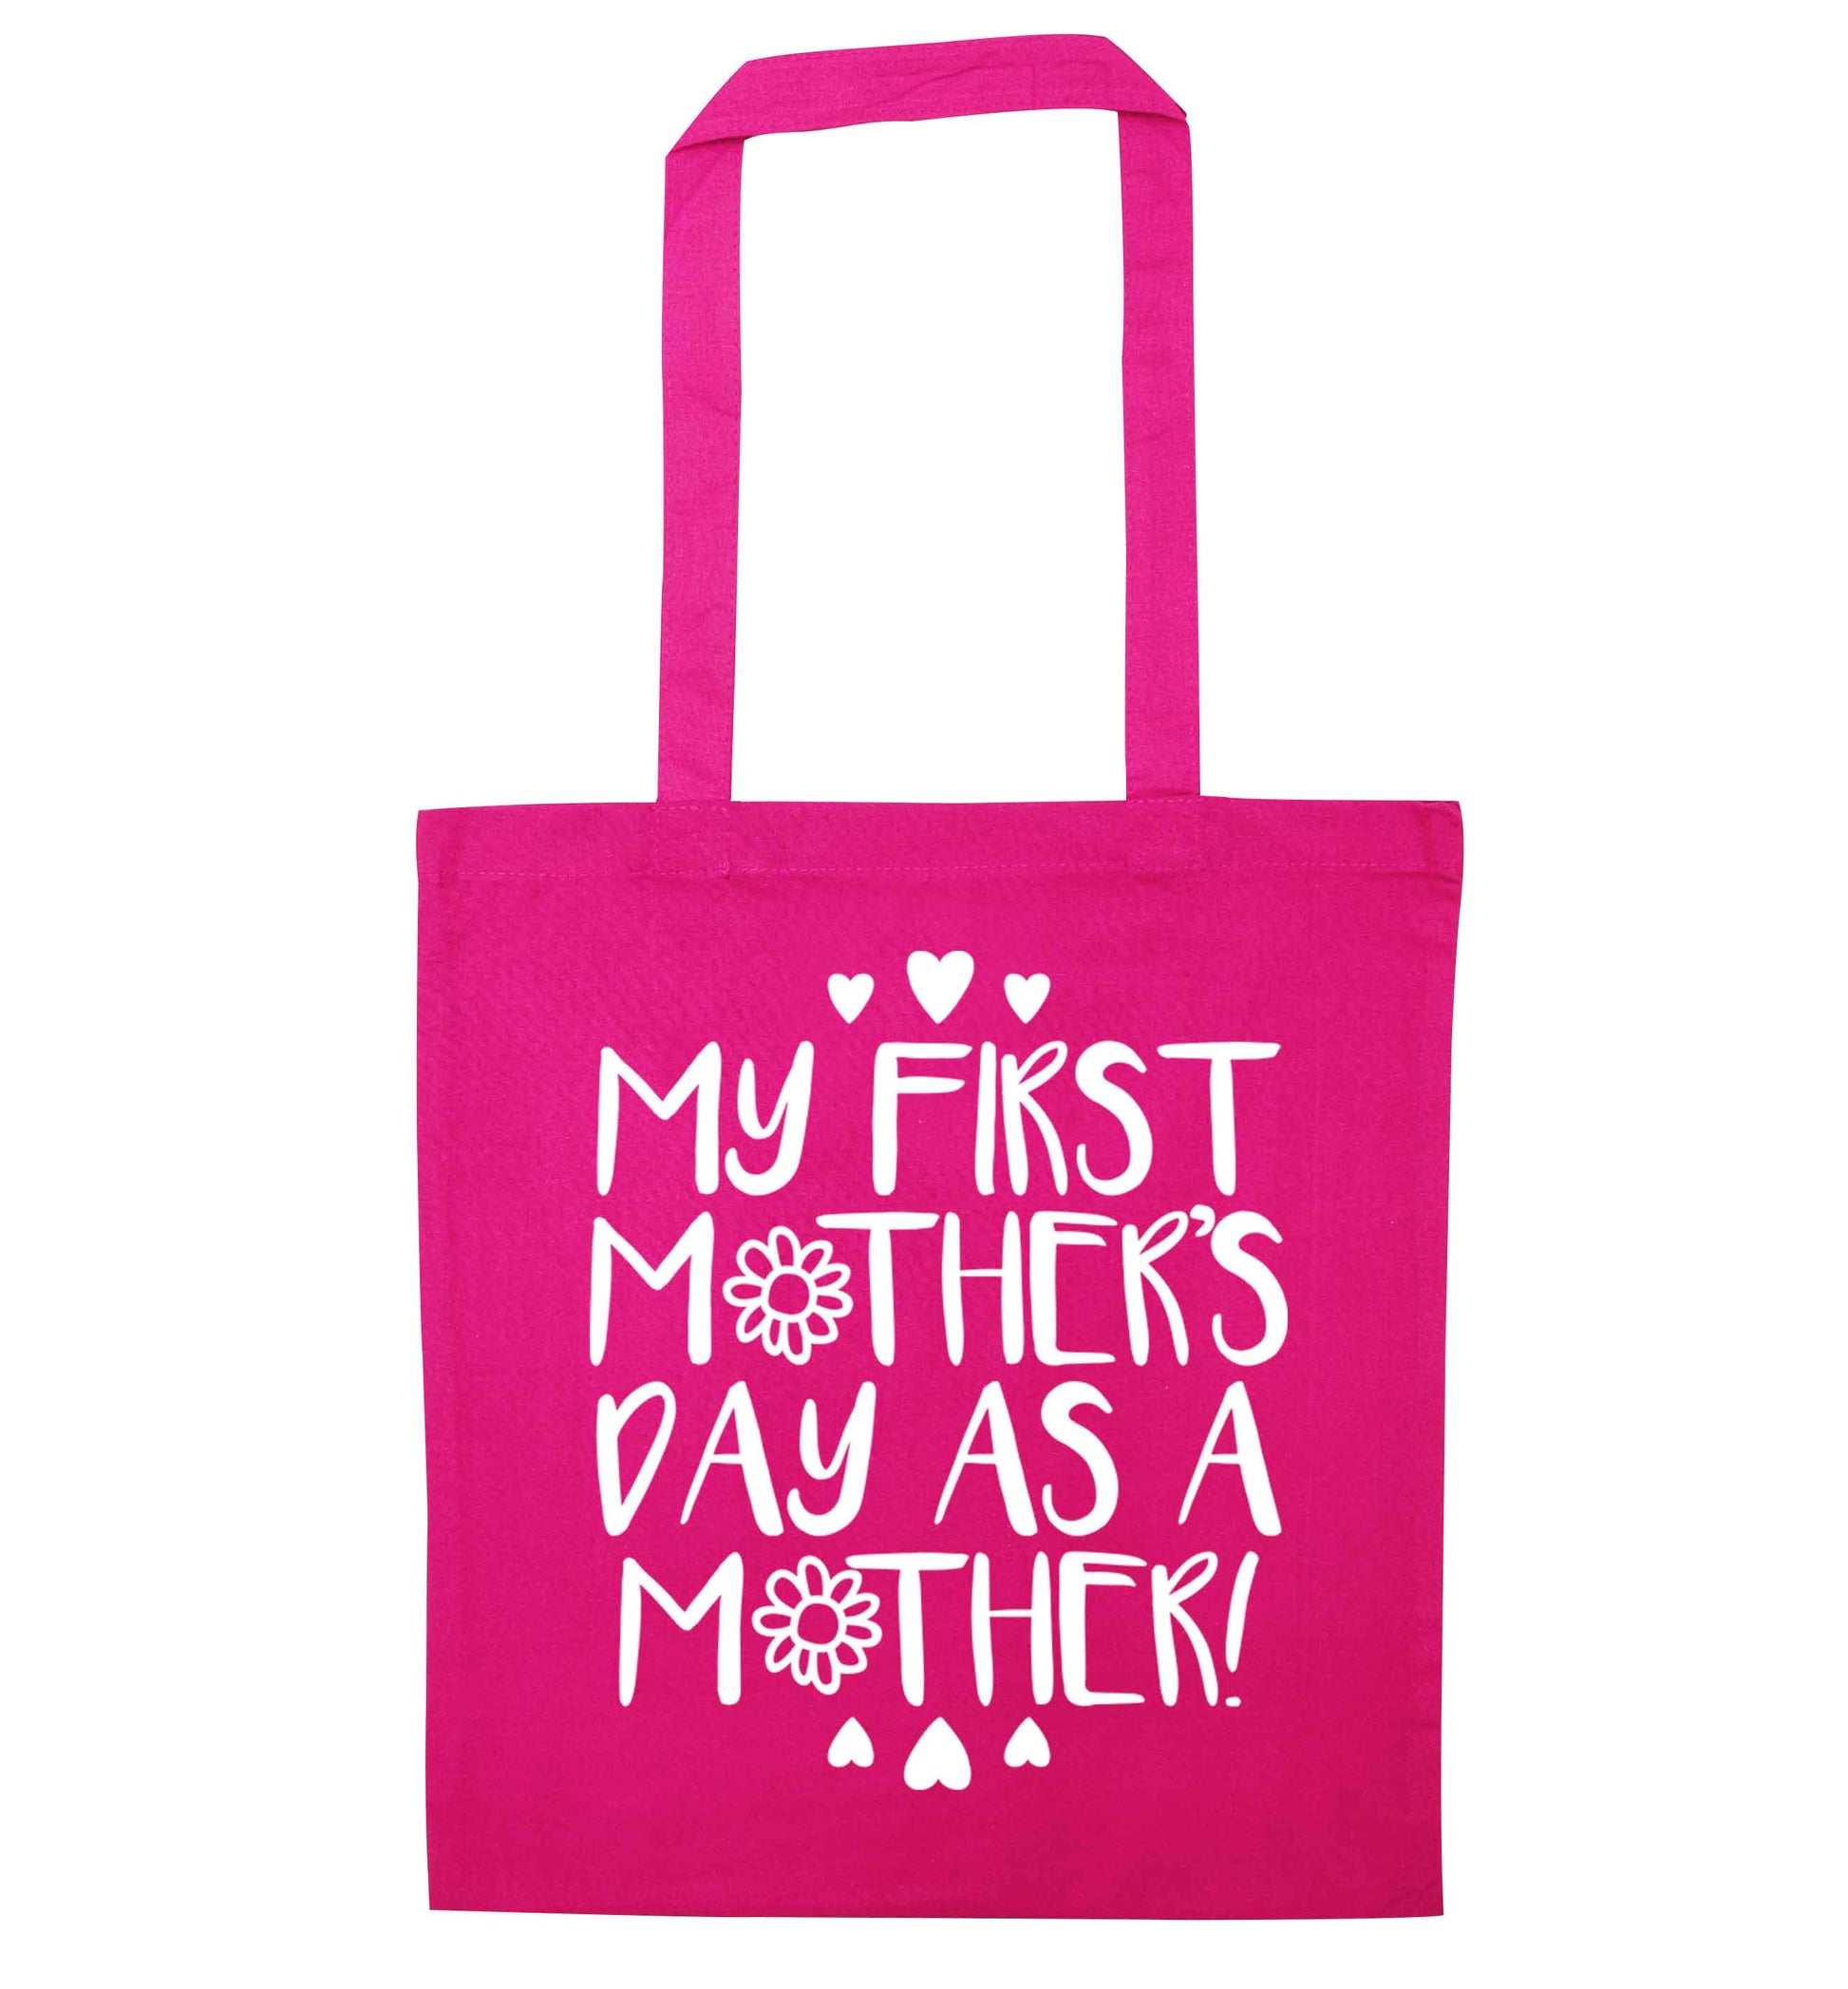 It's my first mother's day as a mother pink tote bag